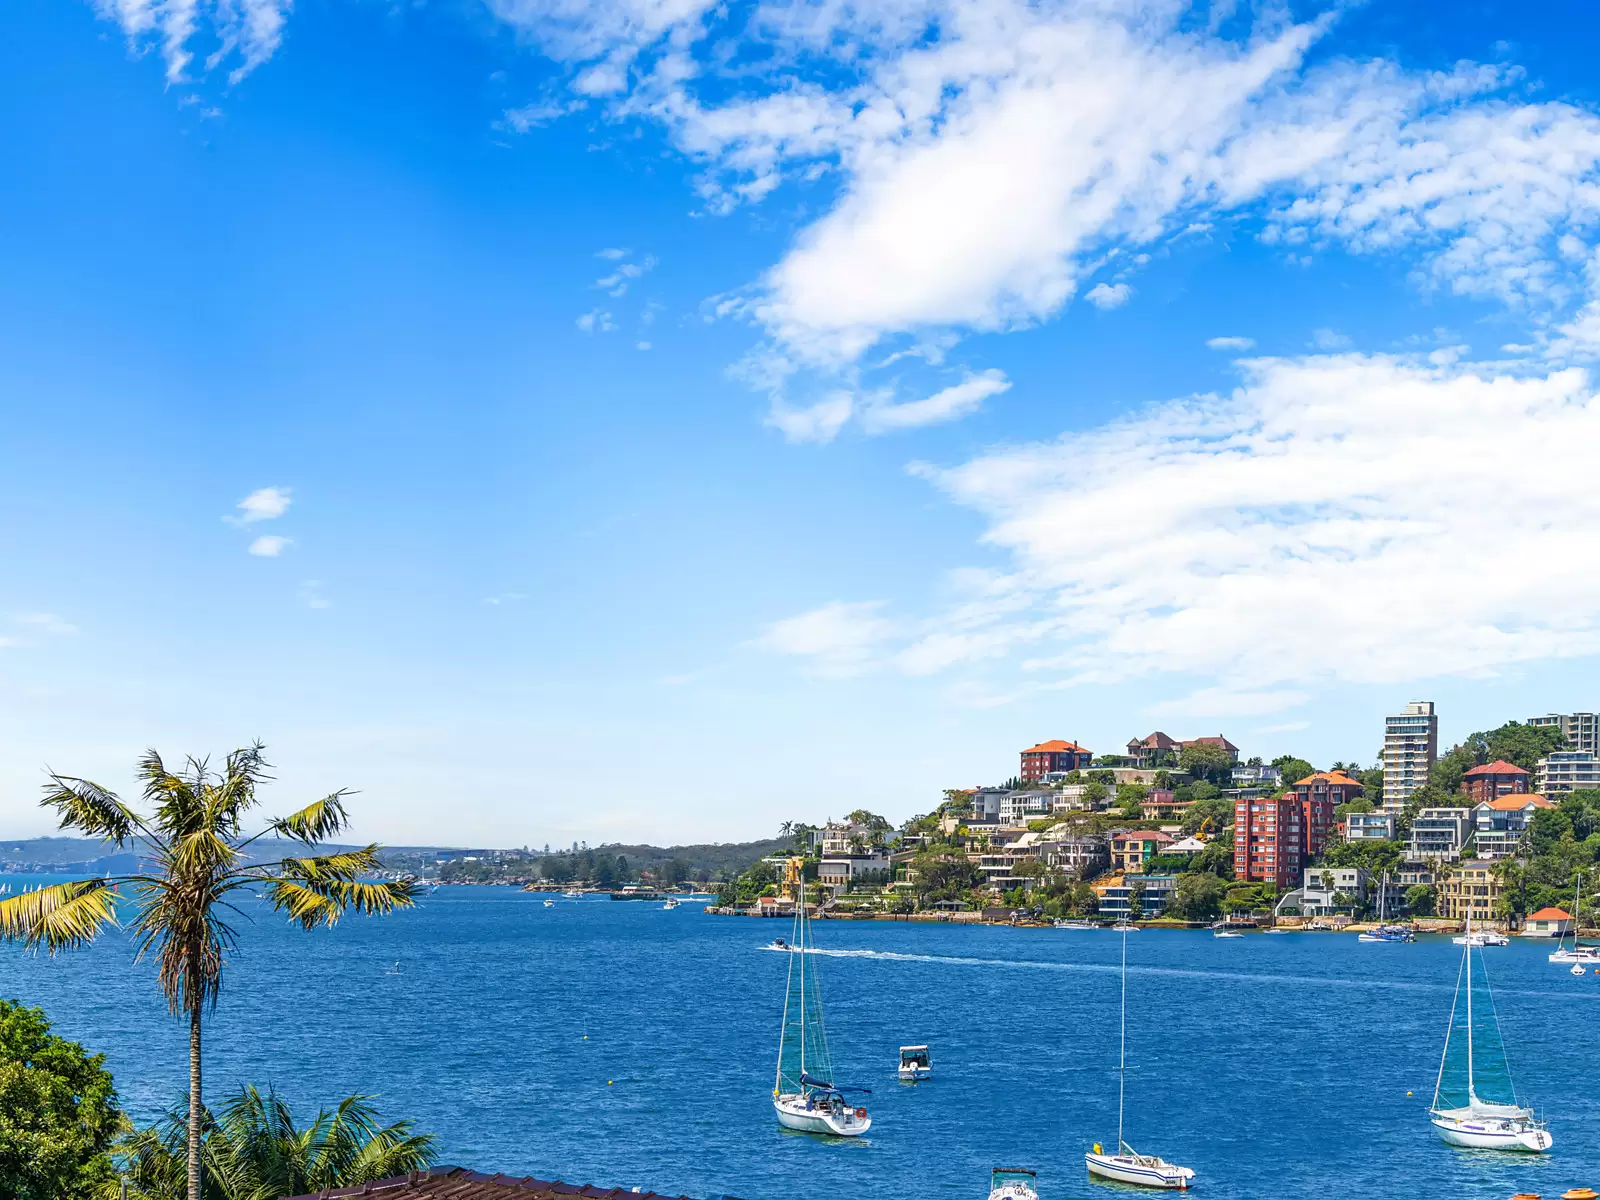 2A/27 Sutherland Crescent, Darling Point For Sale by Sydney Sotheby's International Realty - image 1